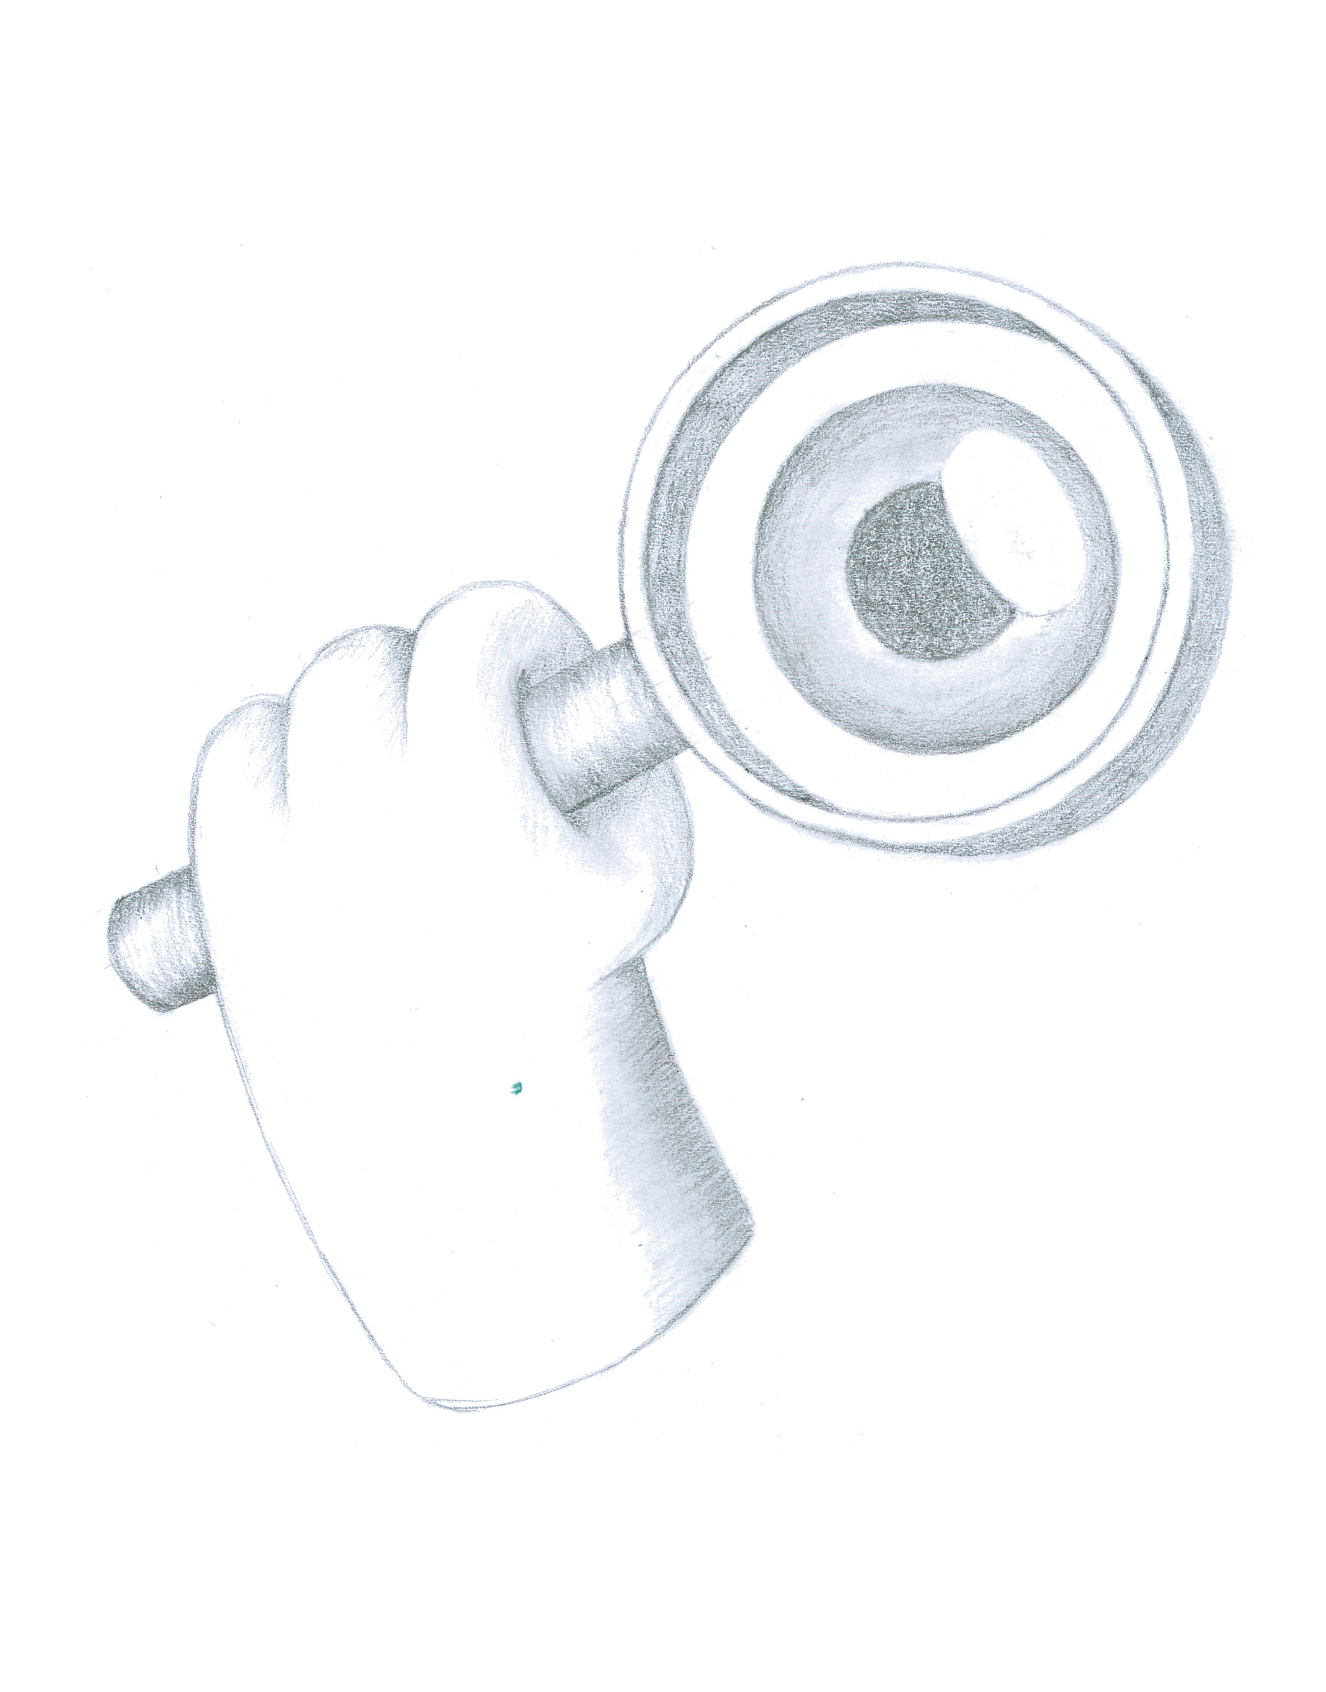 A hand drawn sketch of a hand holding a magnifying glass with an eye